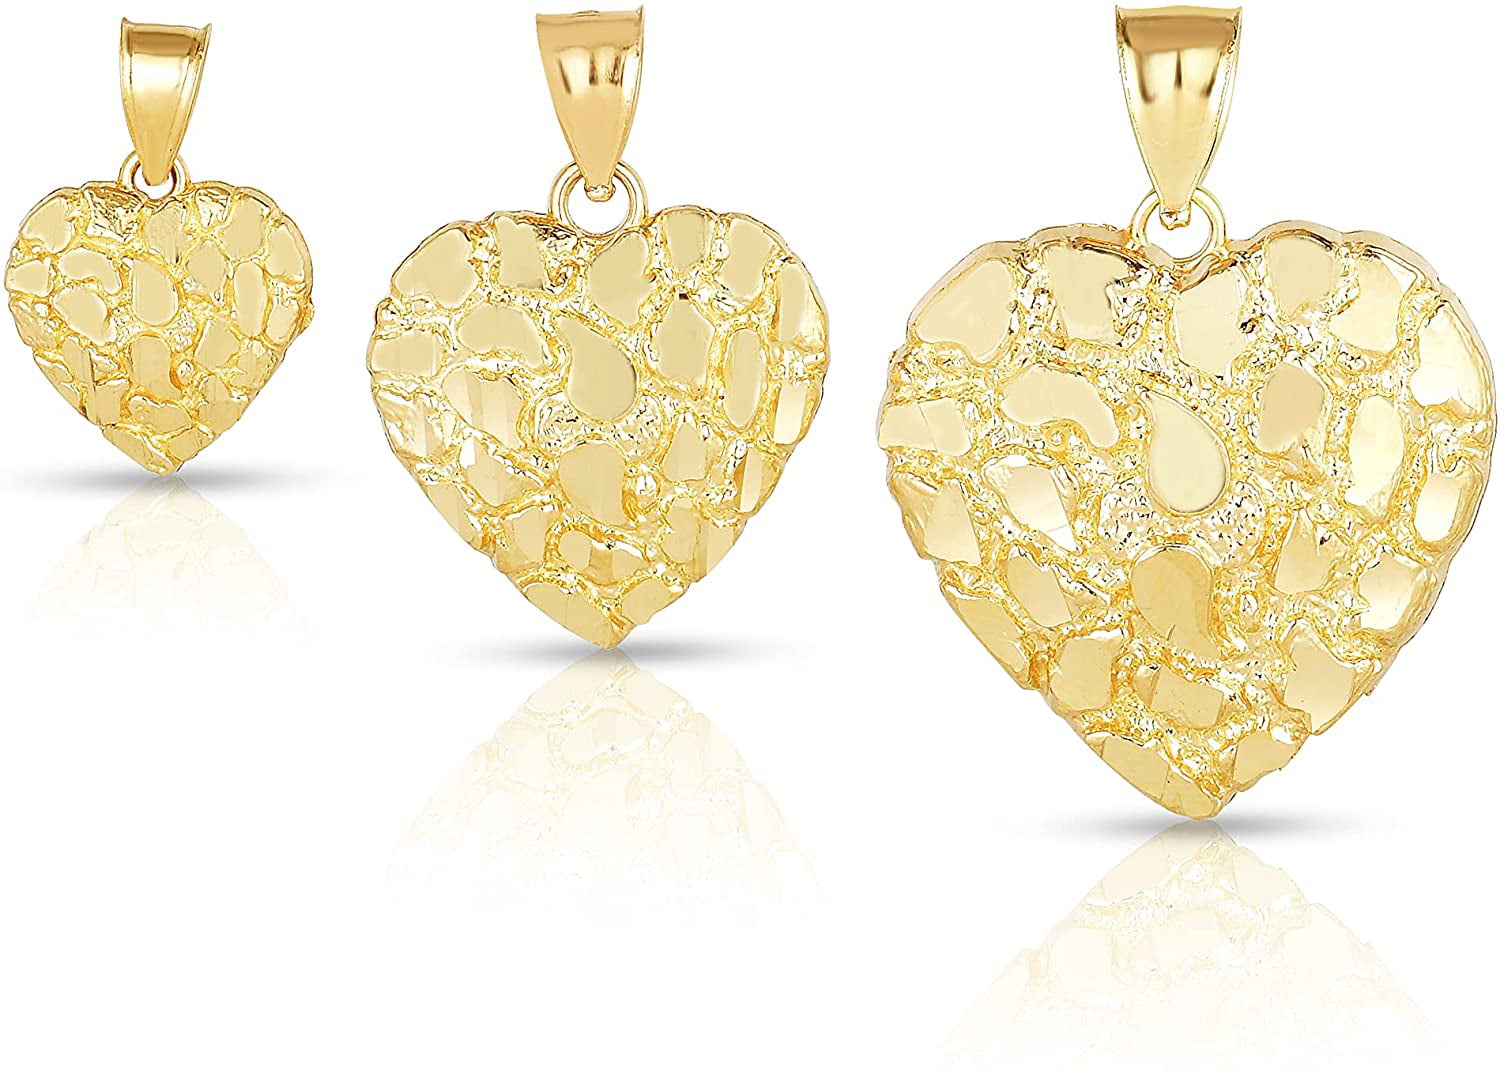 Floreo 10k Yellow Gold Nugget Heart Pendant with Optional Chain Necklace -  Walmart.com